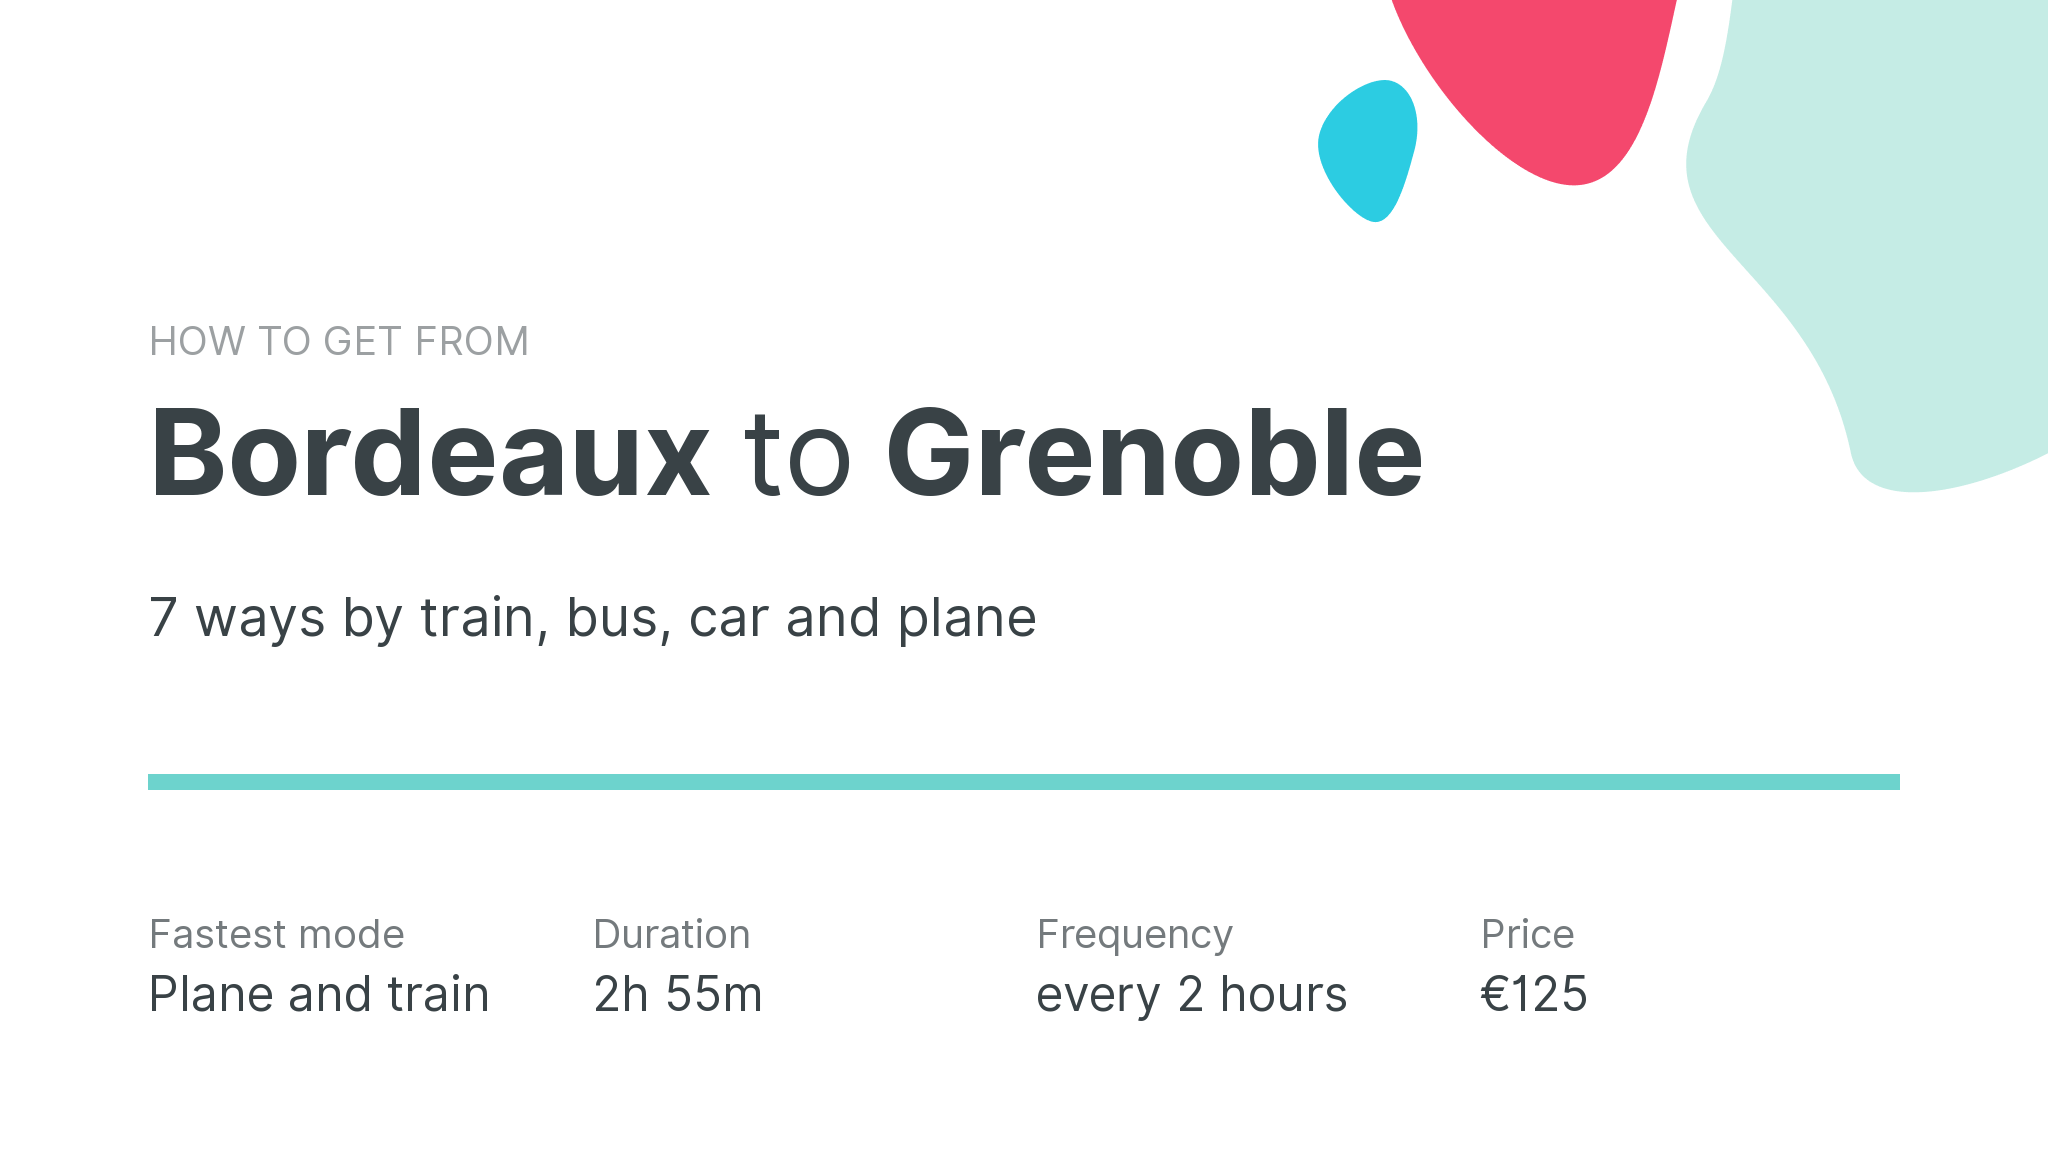 How do I get from Bordeaux to Grenoble